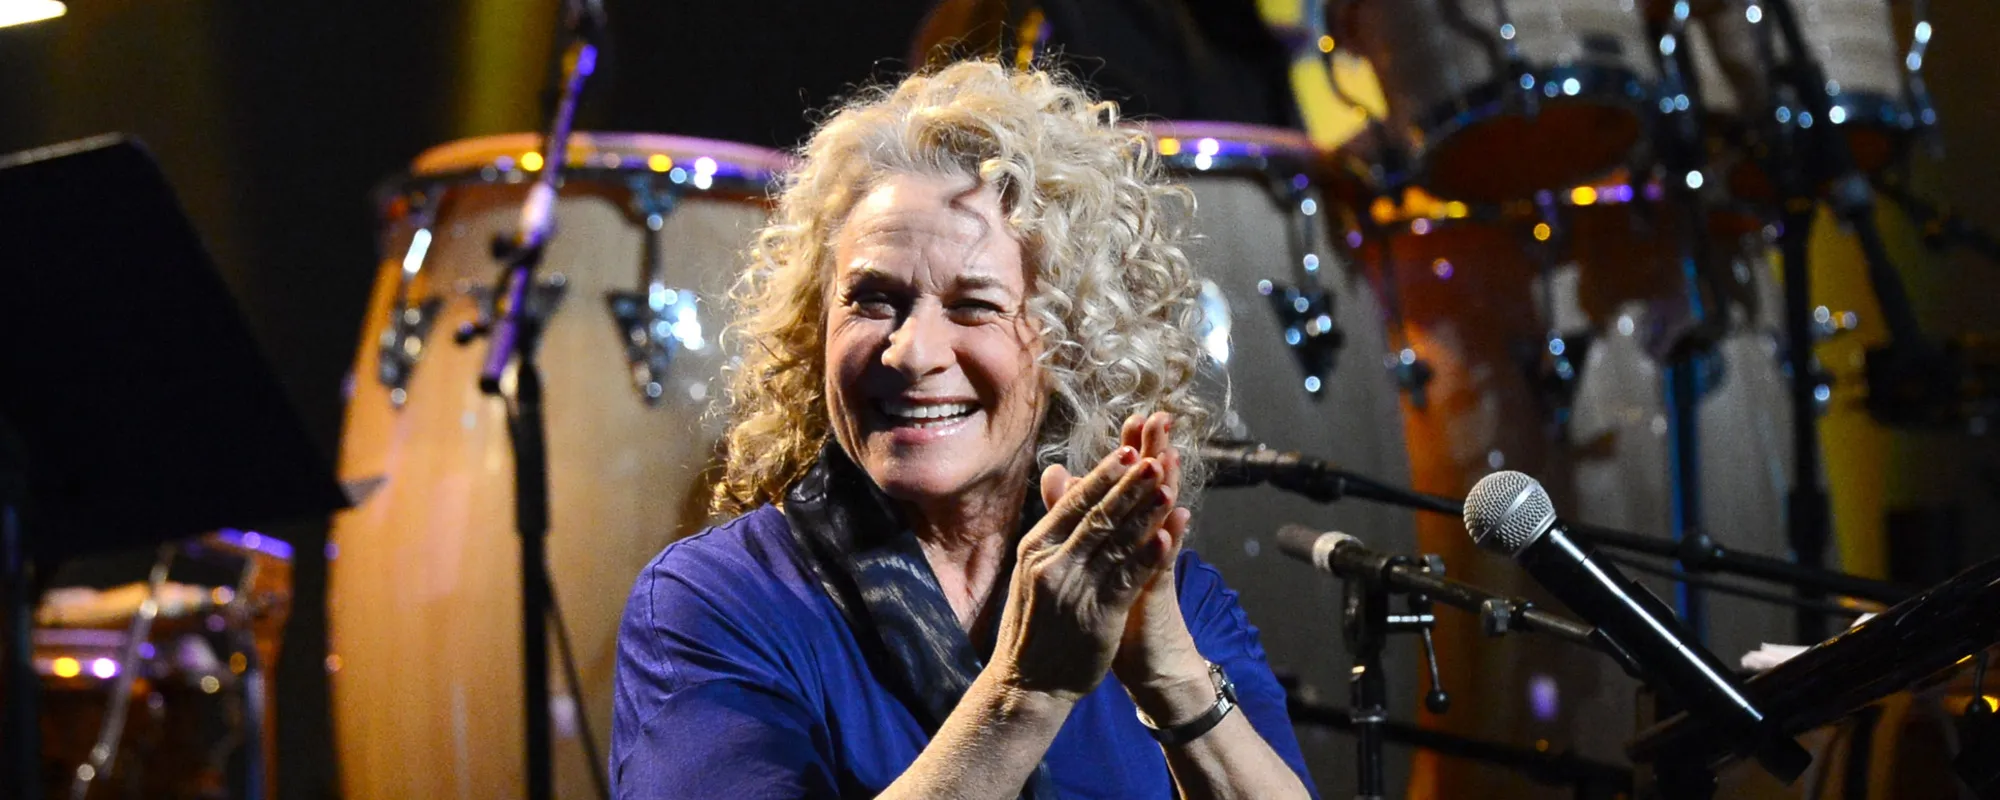 Behind the Meaning of Carole King’s “Bitter with the Sweet”